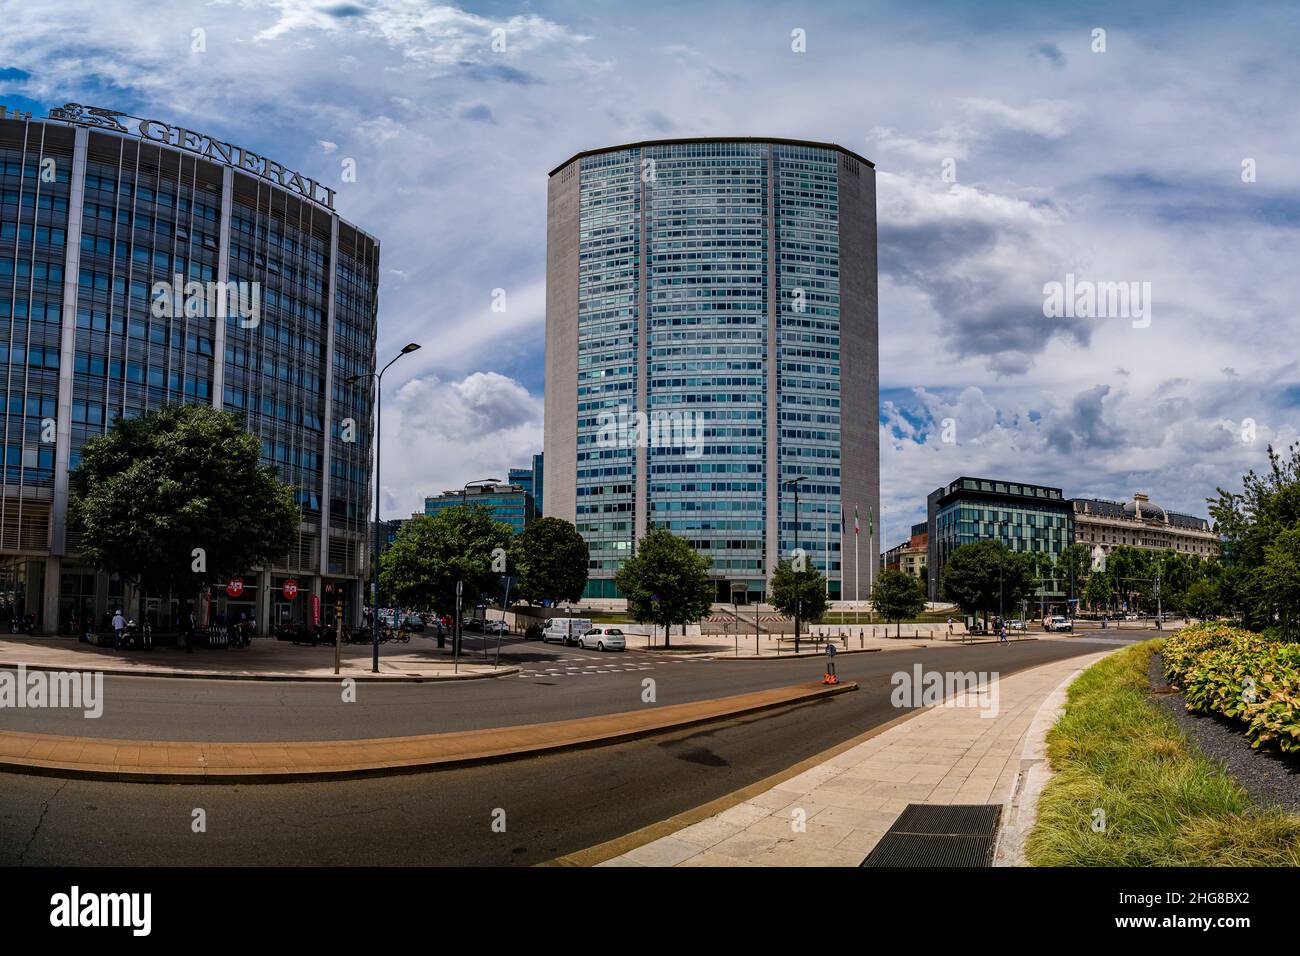 View of the Pirelli Building, seen from Piazza Duca d'Aosta, close to the main railway station of Milan, Milano Centrale, Stazione Milano Stock Photo